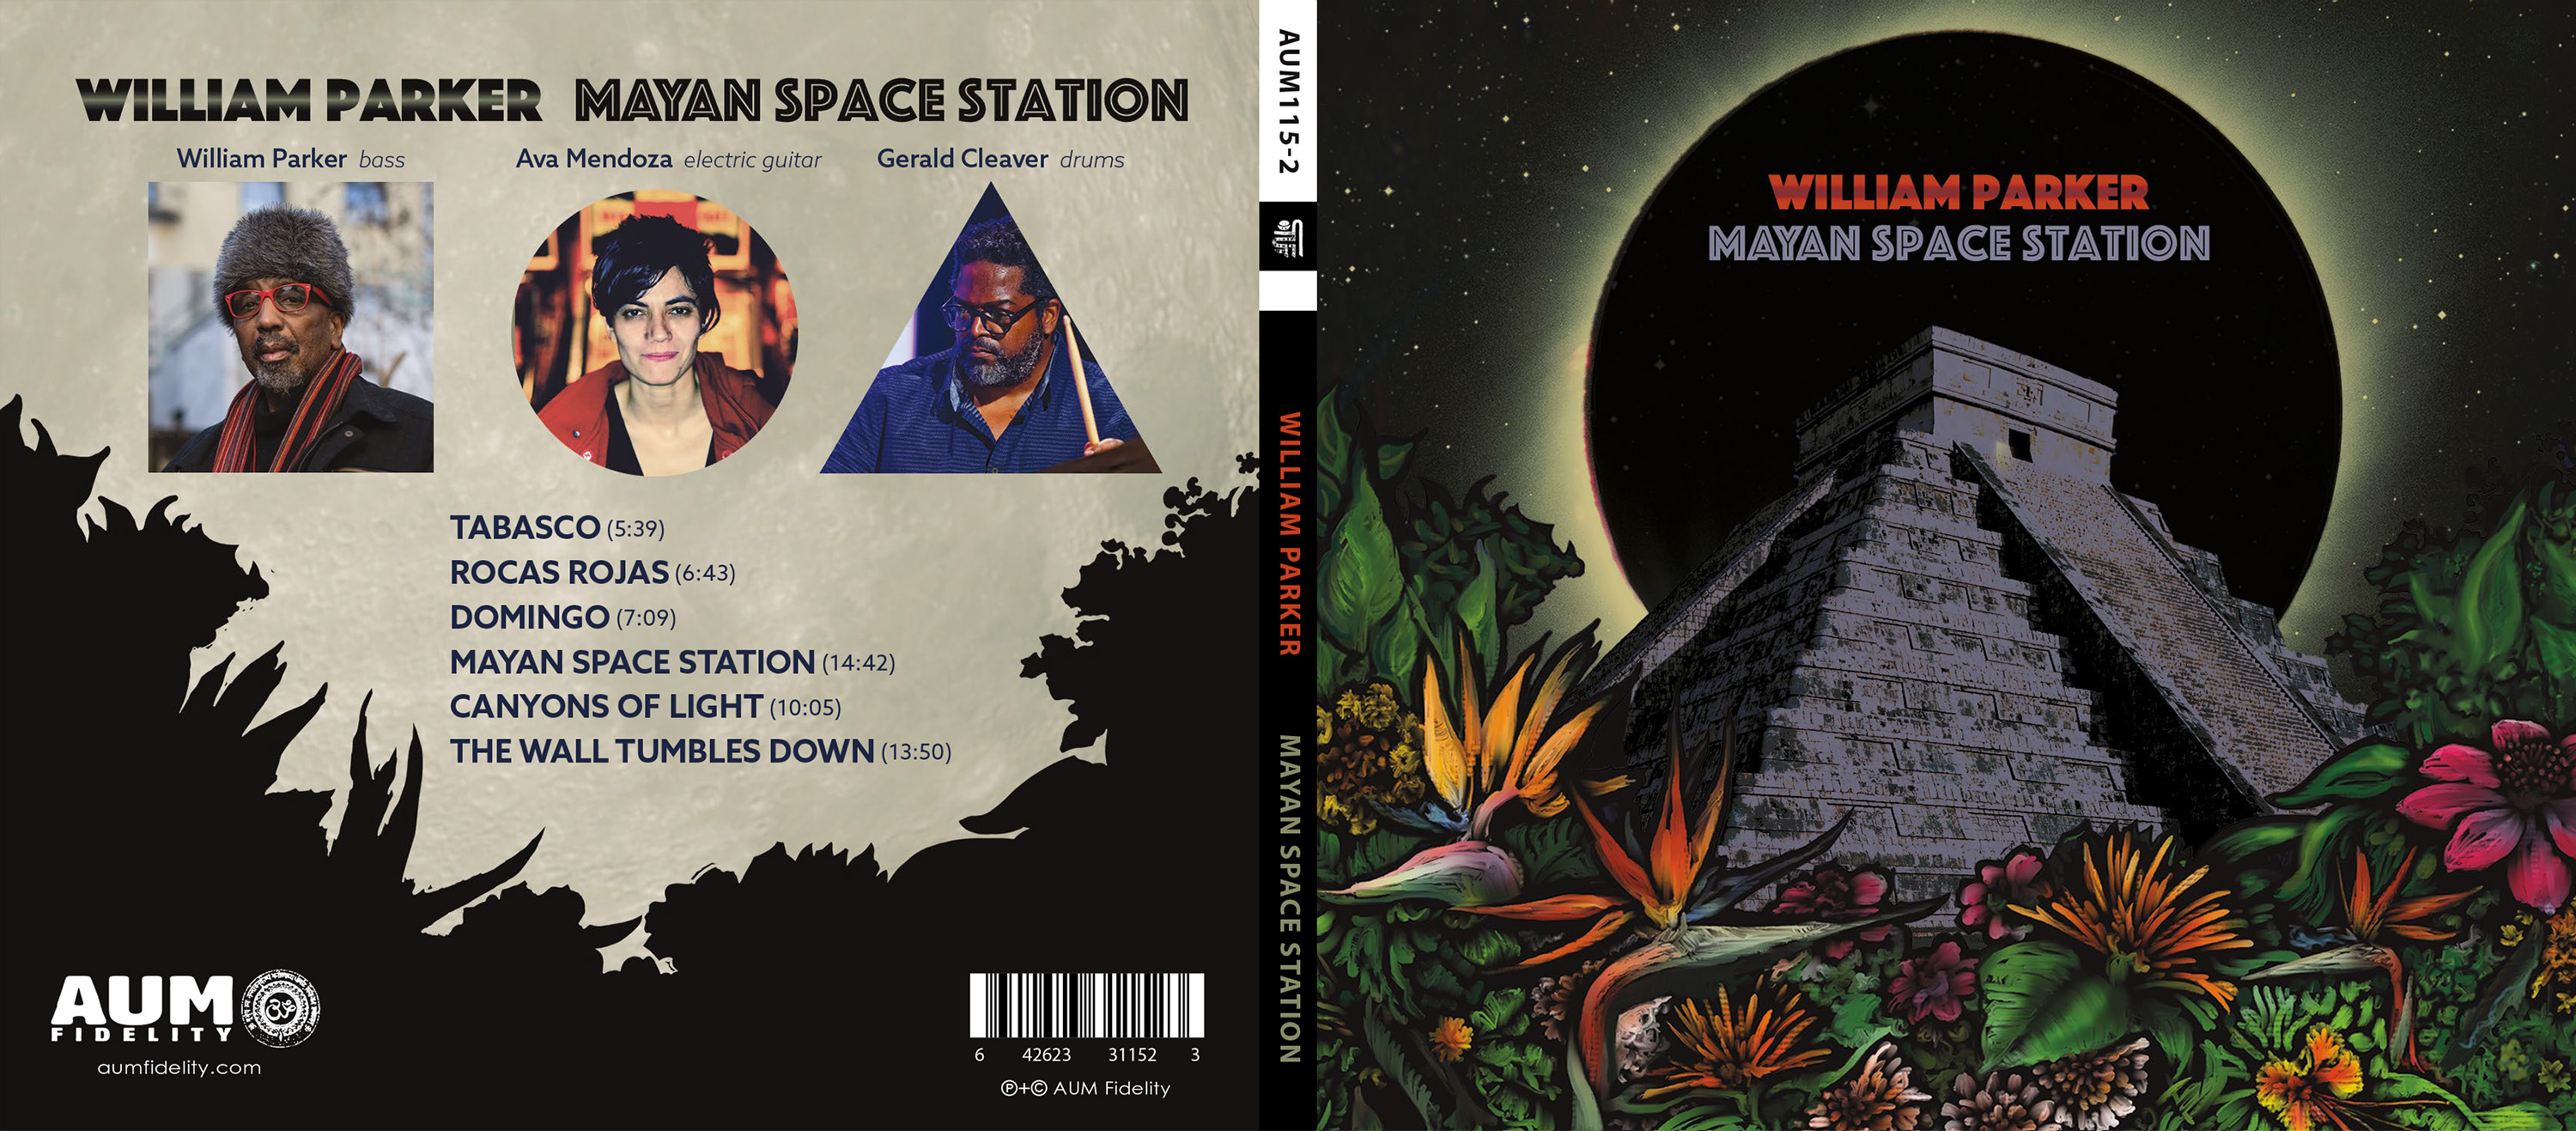 cd front (r) and back (l) cover for Mayan Space Station by William Parker